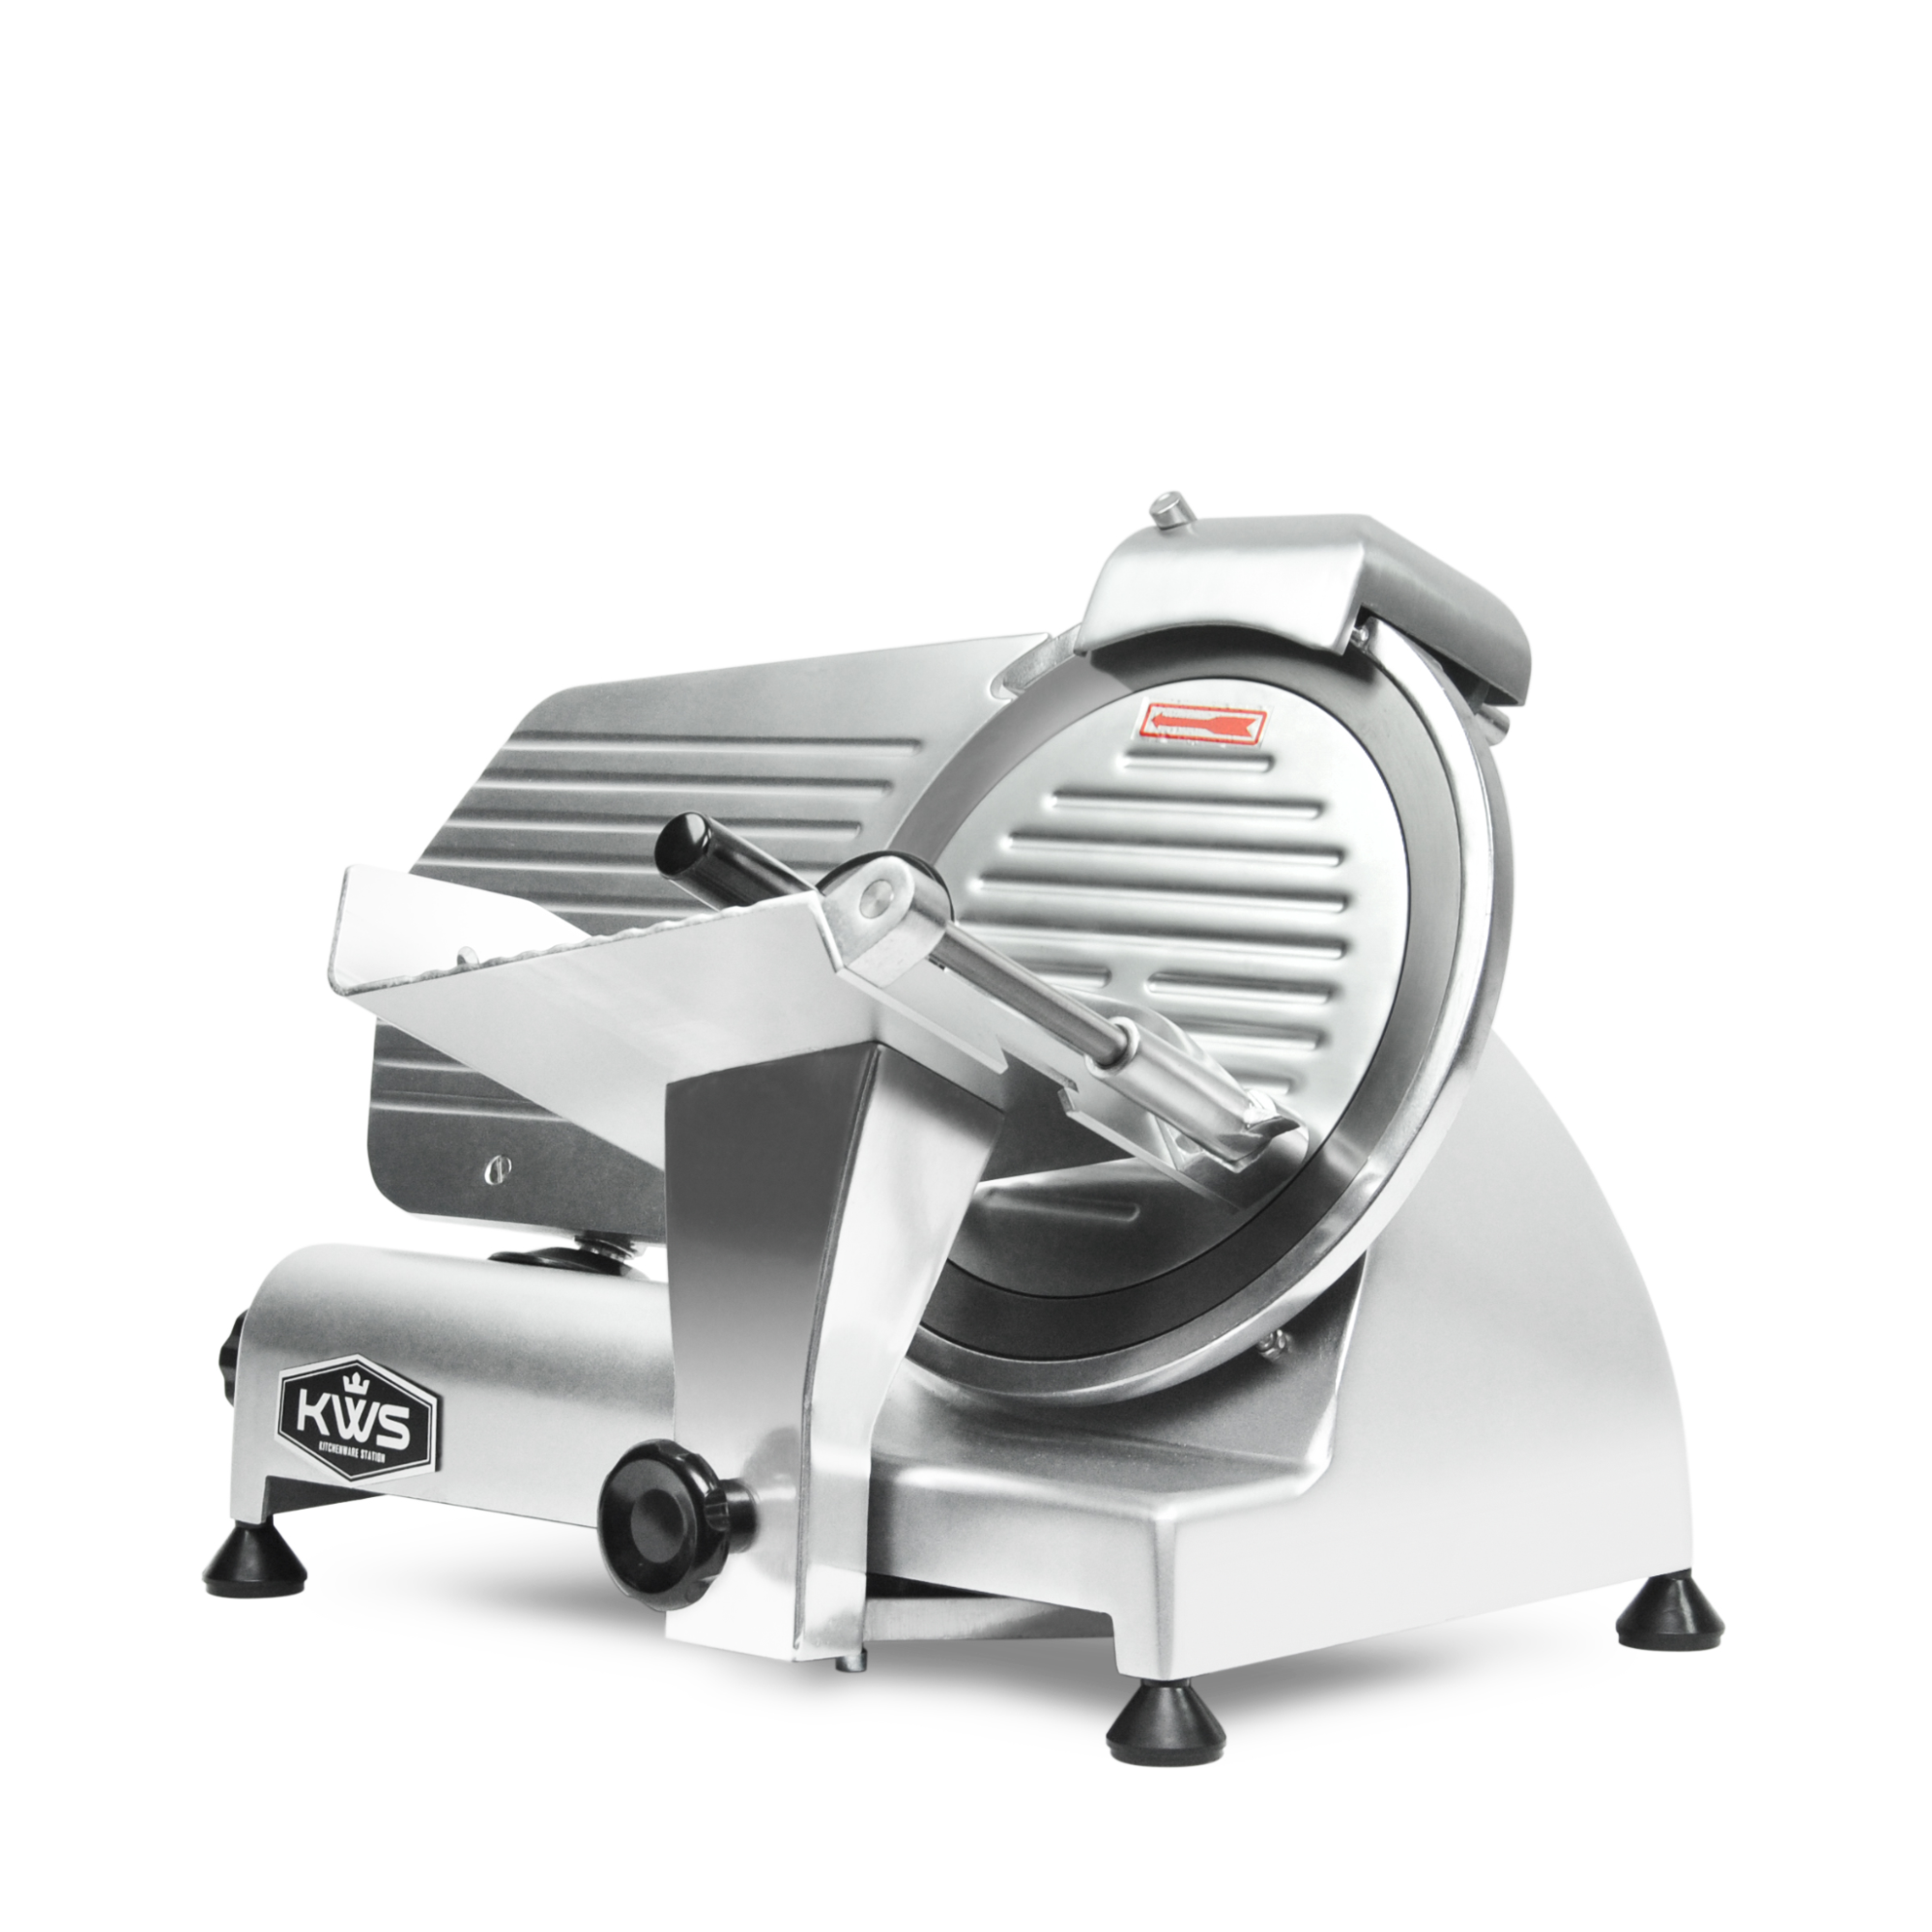 KWS Commercial 320W Electric Meat Slicer